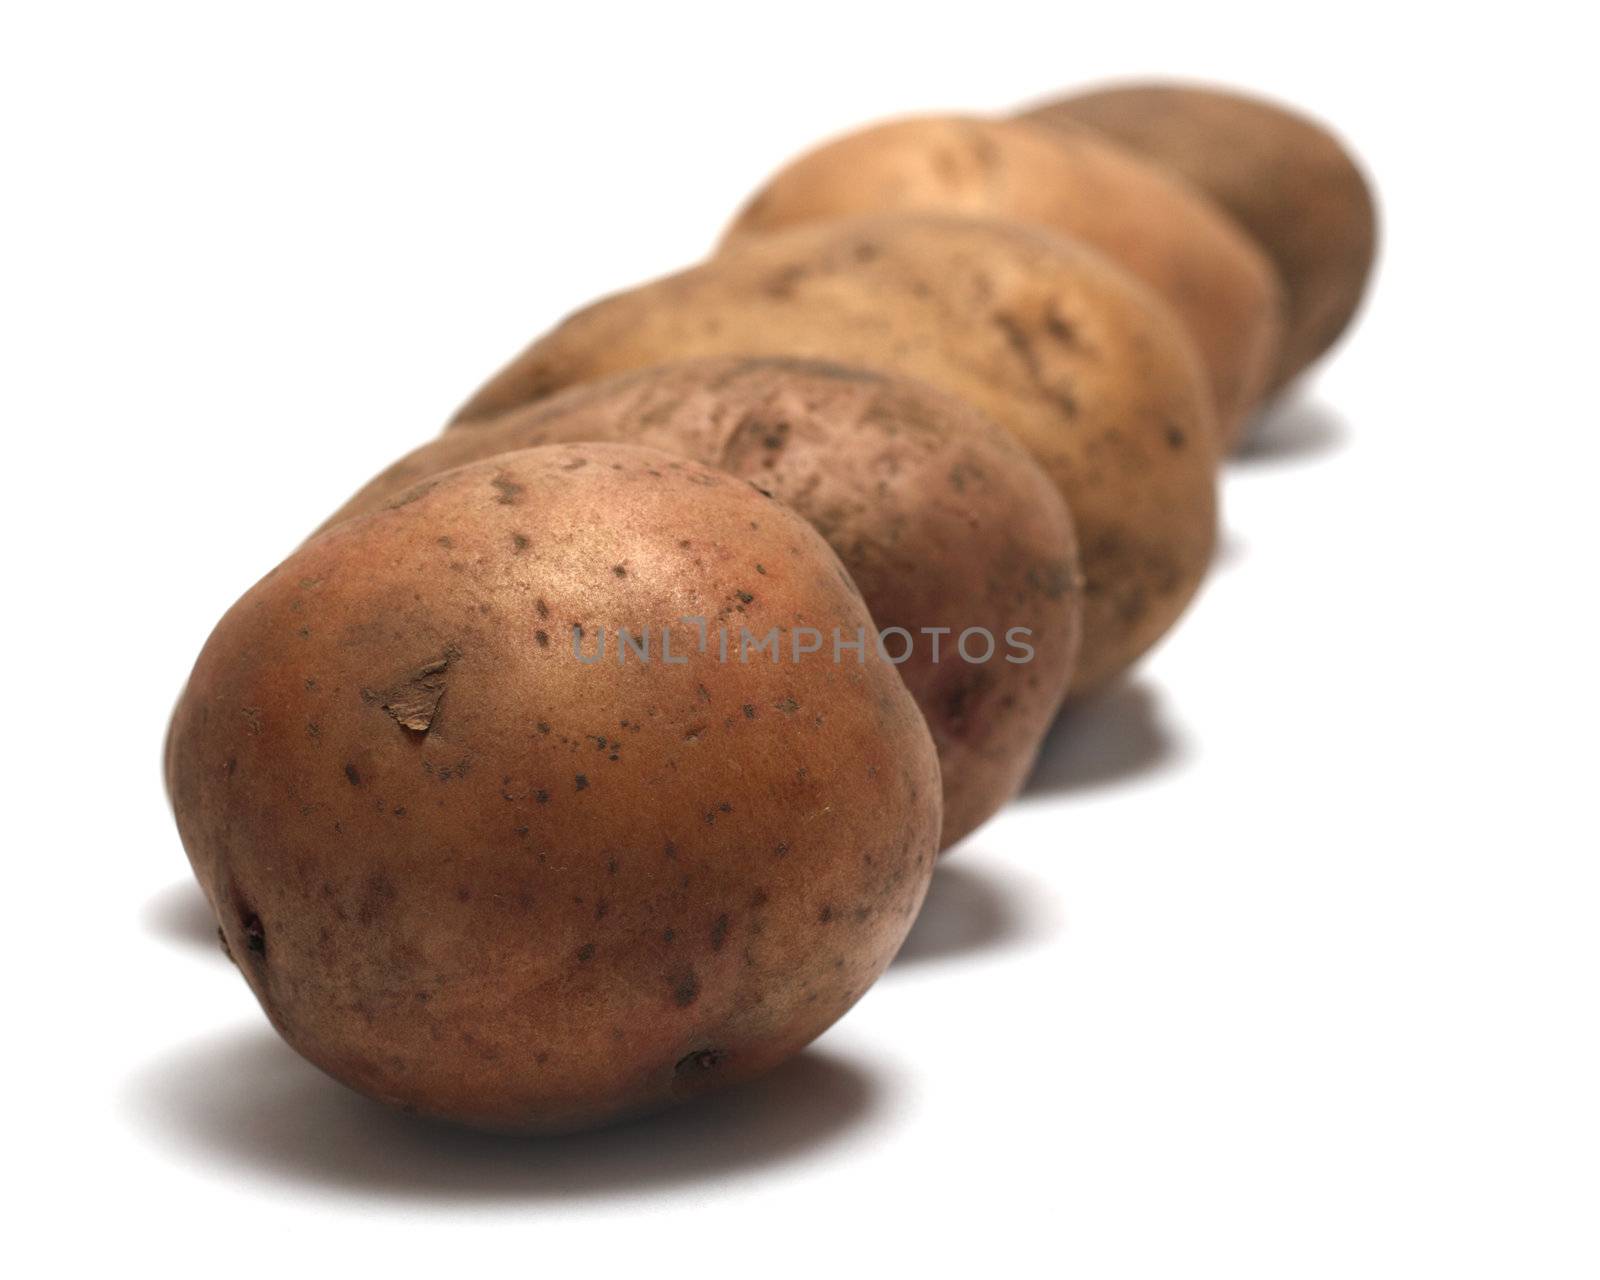 Organic raw potatoes in a row, isolated on white background.